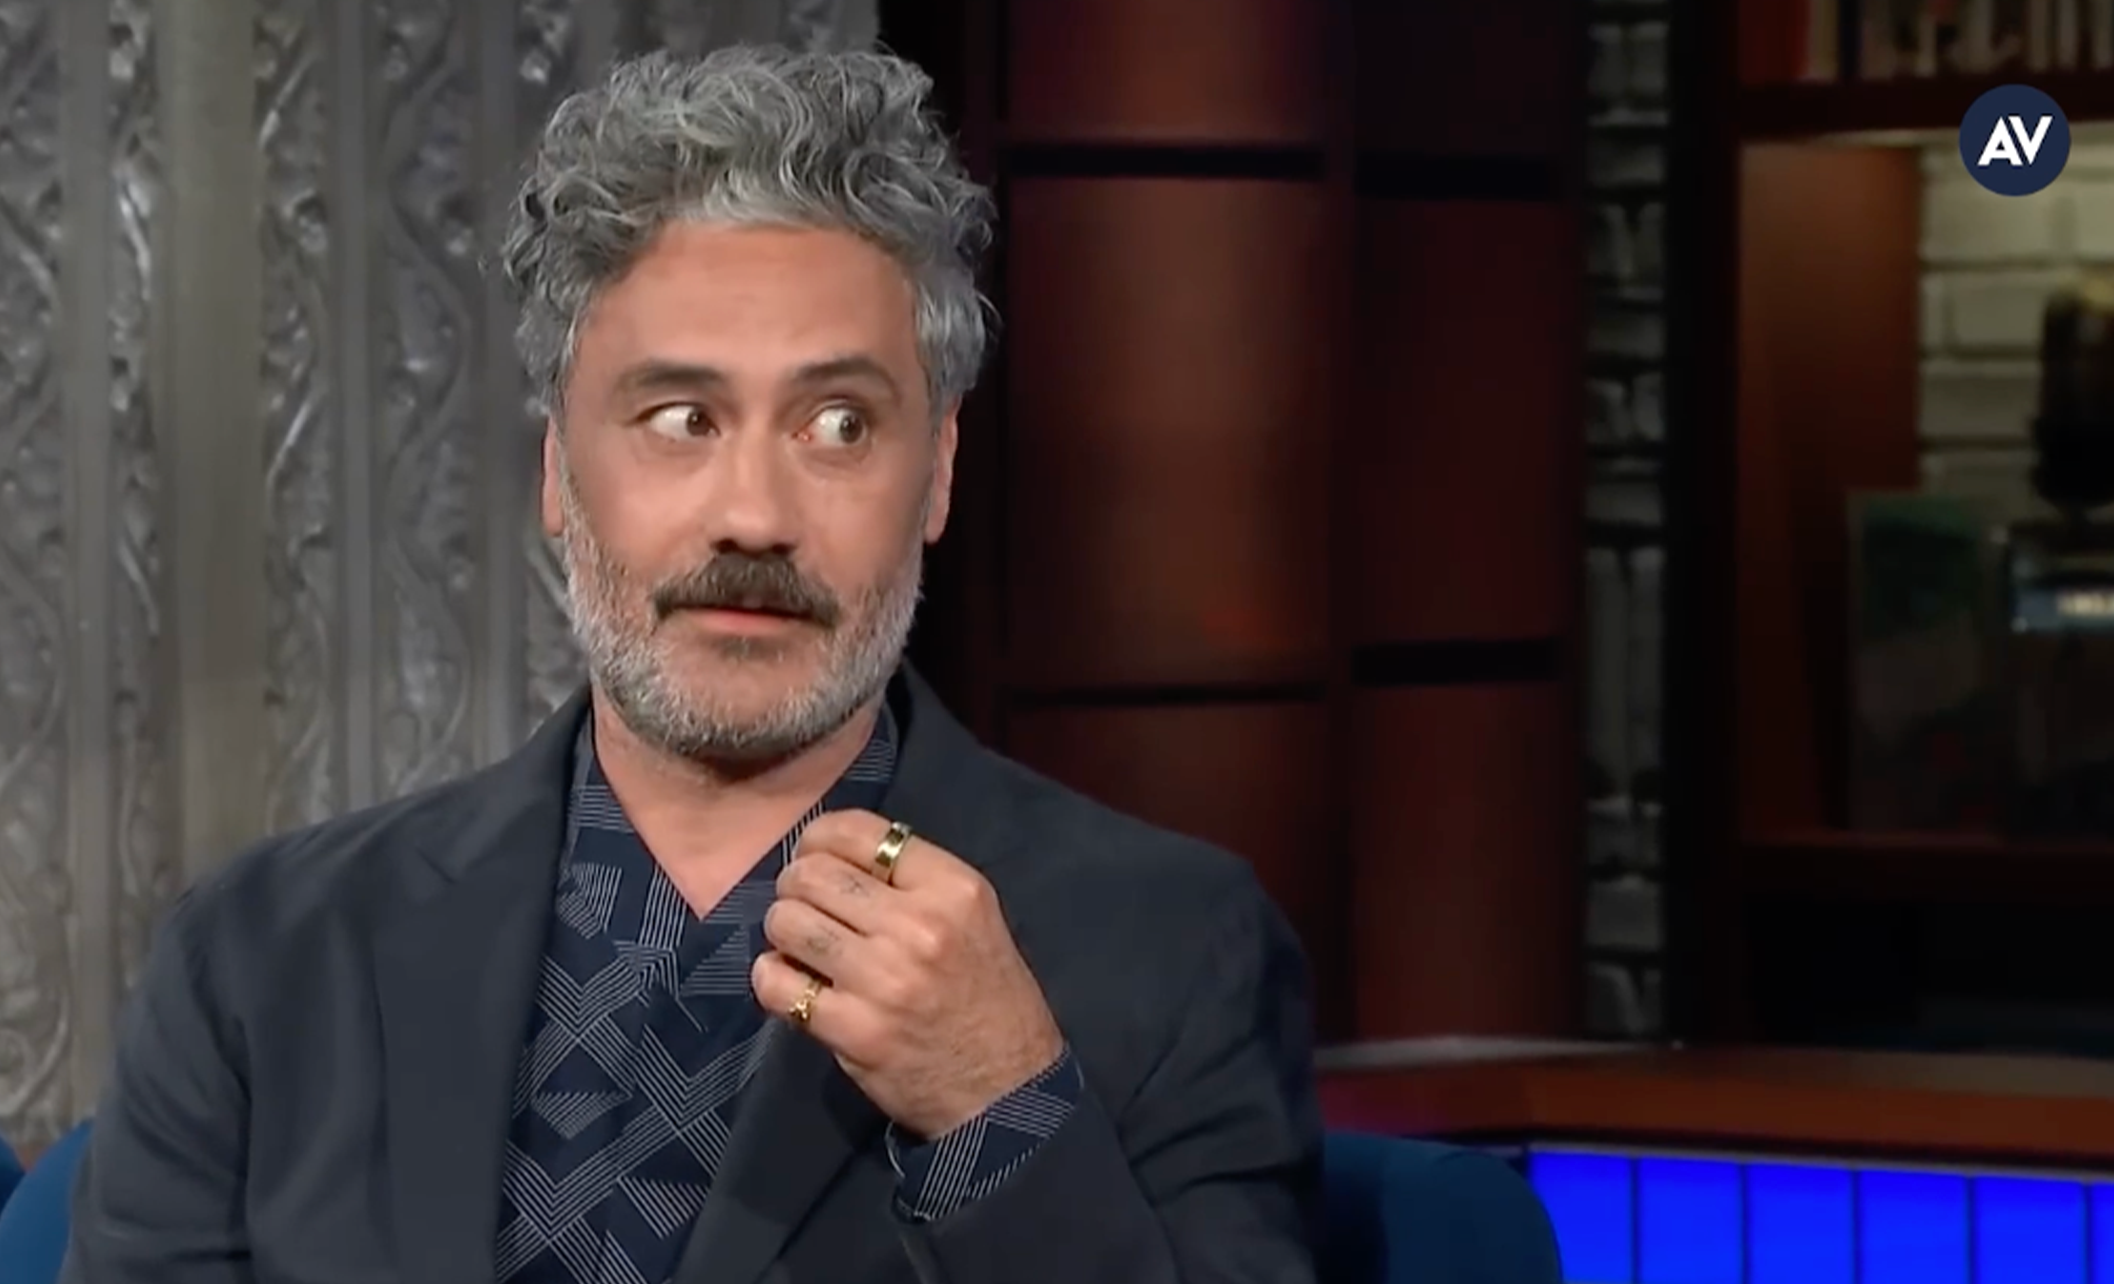 Taika Waititi “borrowed” Peter Jackson’s gear for What We Do In The Shadows